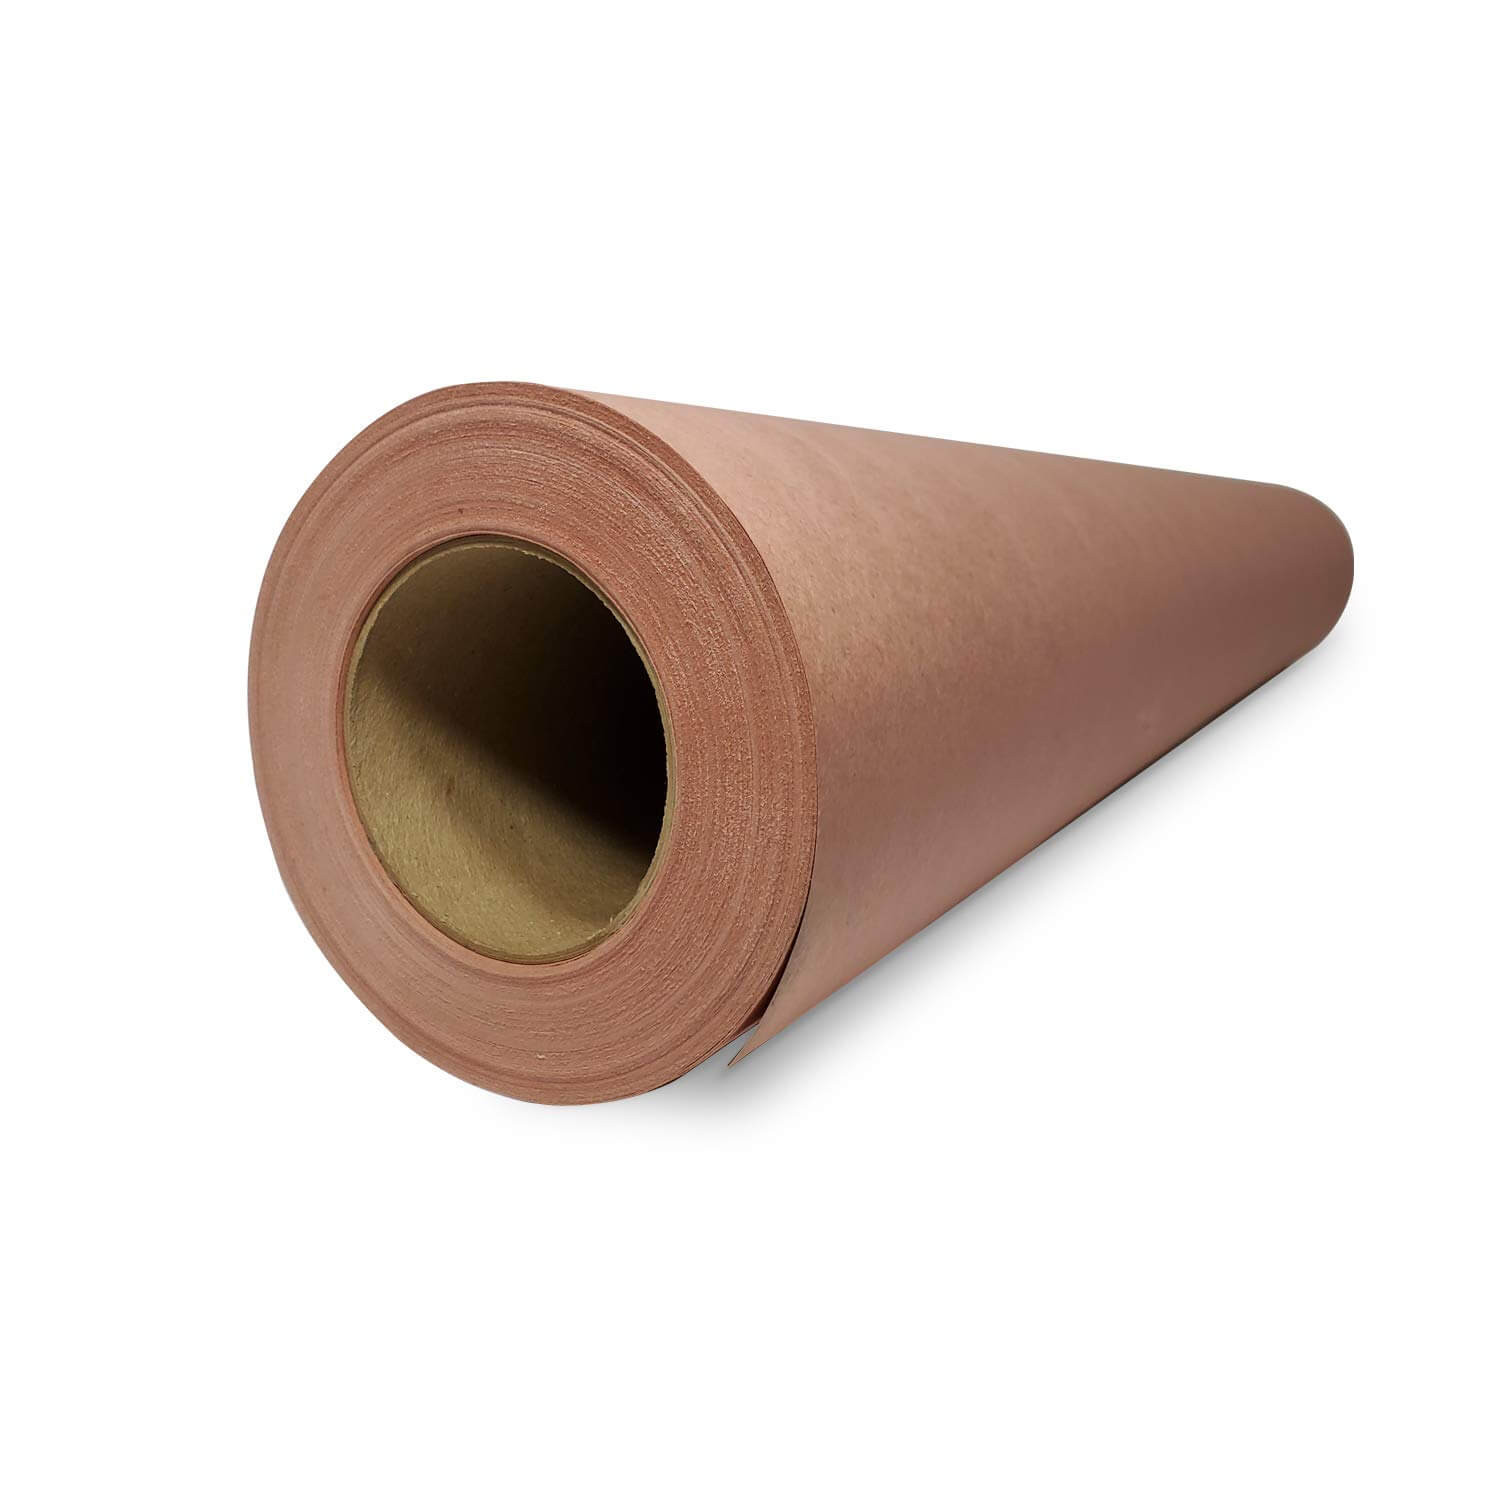 https://idlpack.com/image/cache/catalog/Products/Kraft-Paper/Constructor-Rosin-Paper/Red-Rosin-Contractor-Paper-Roll-1500x1500.jpg